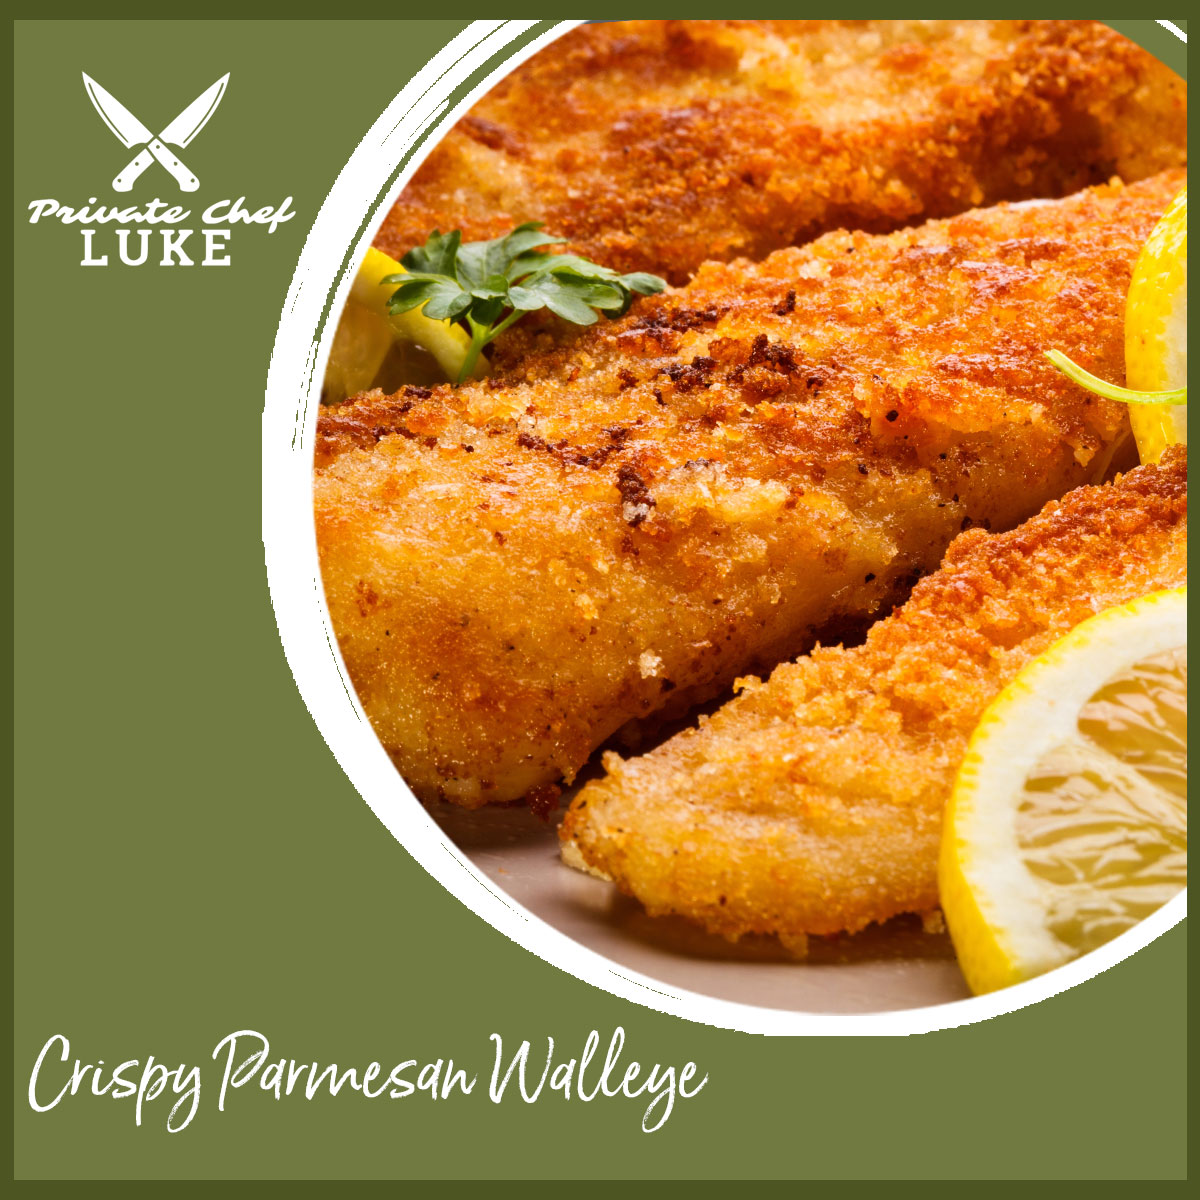 Click to view and download the recipe for Chef Luke's Crispy Parmesan Walleye.